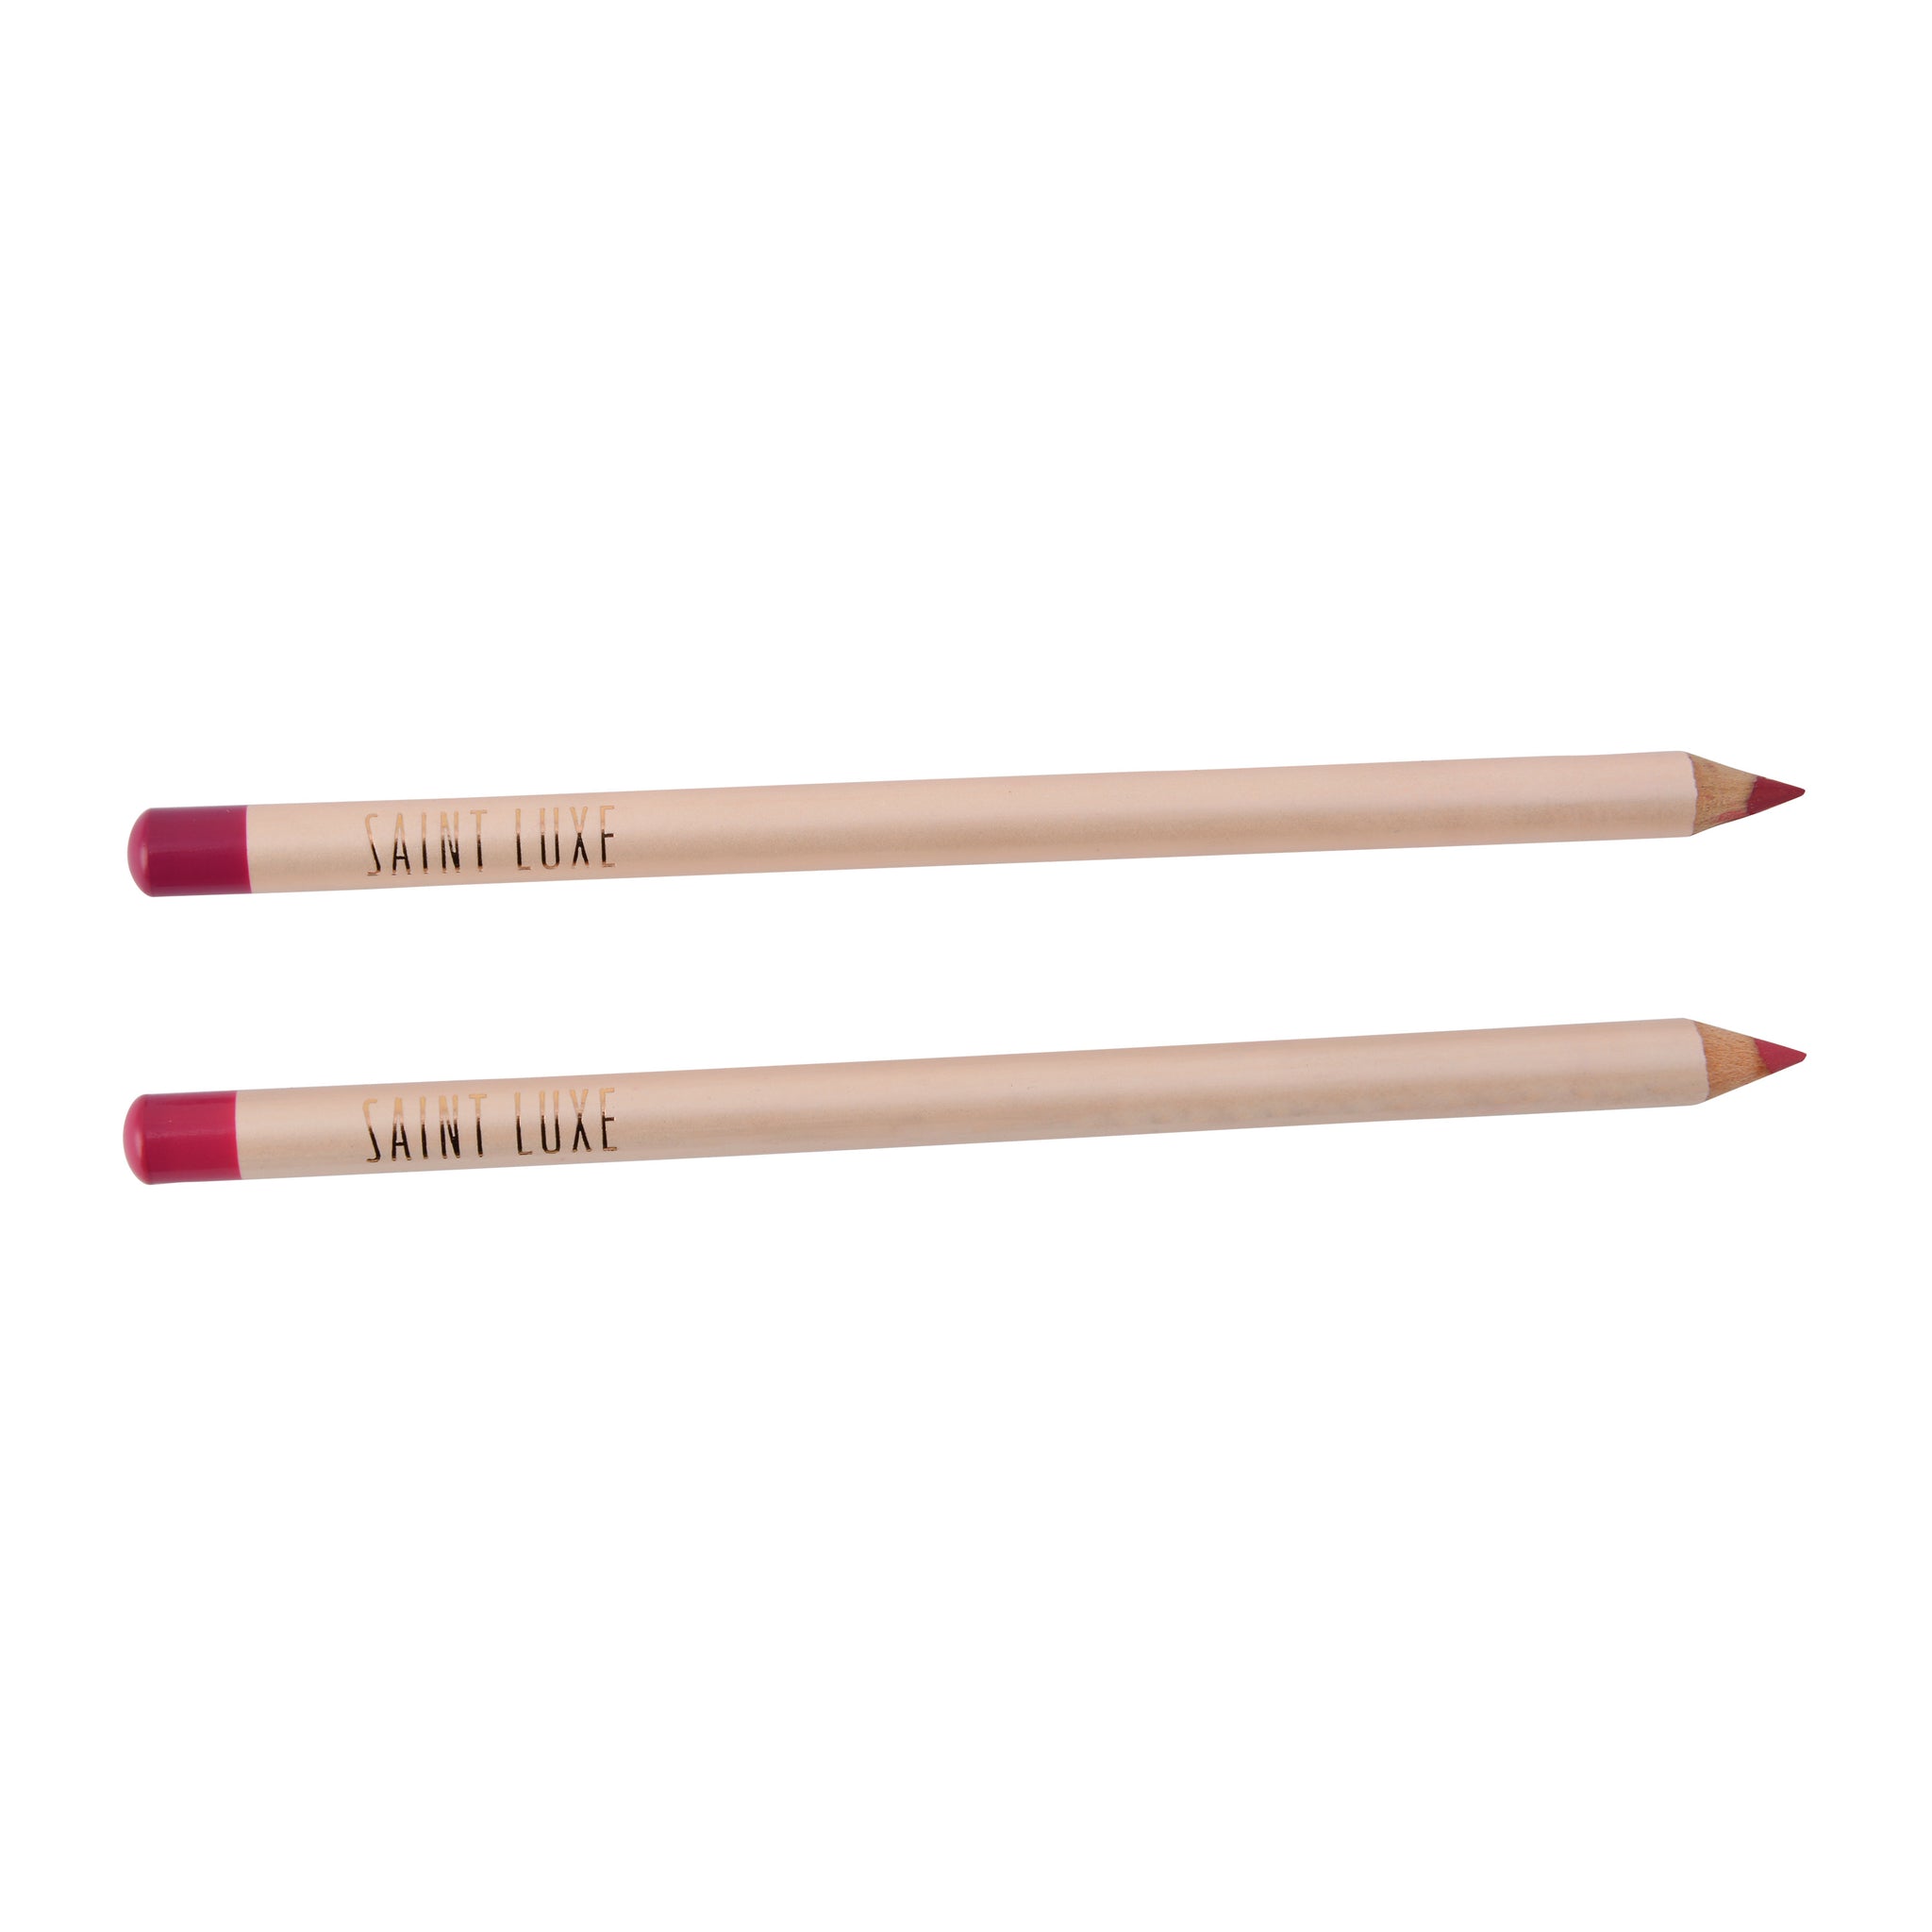 Saint Lip SPRING Beauty Duo MAGNOLIA + Liner ROSE – PINK Luxe